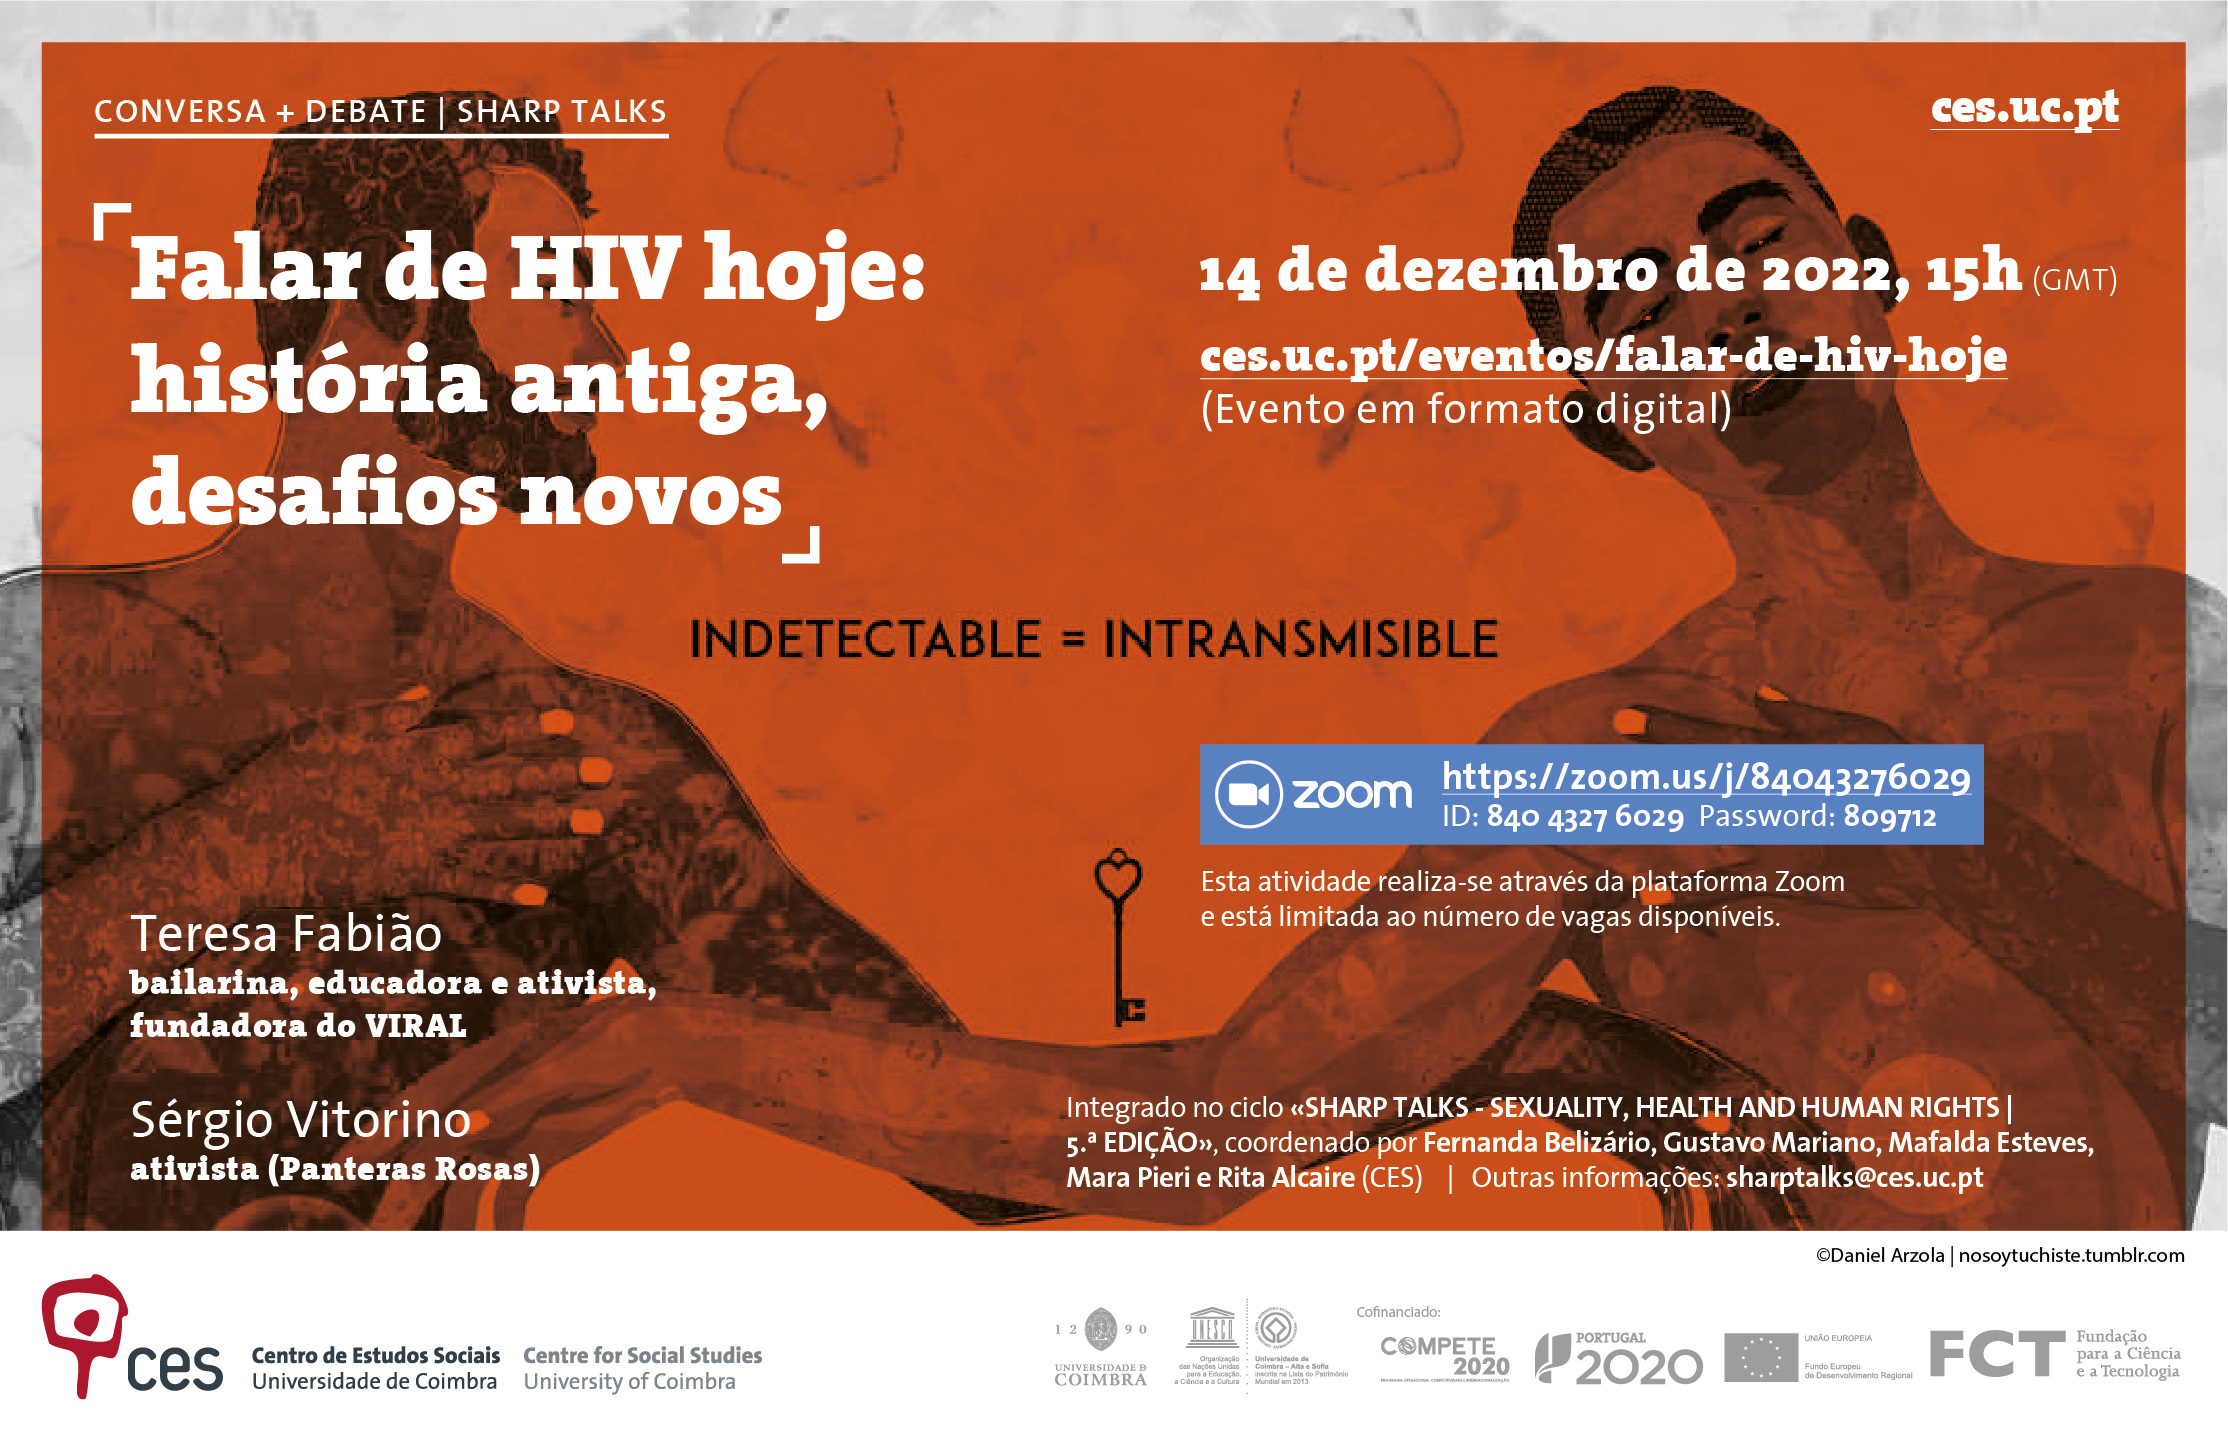 Talking about HIV today: ancient history, new challenges<span id="edit_41078"><script>$(function() { $('#edit_41078').load( "/myces/user/editobj.php?tipo=evento&id=41078" ); });</script></span>